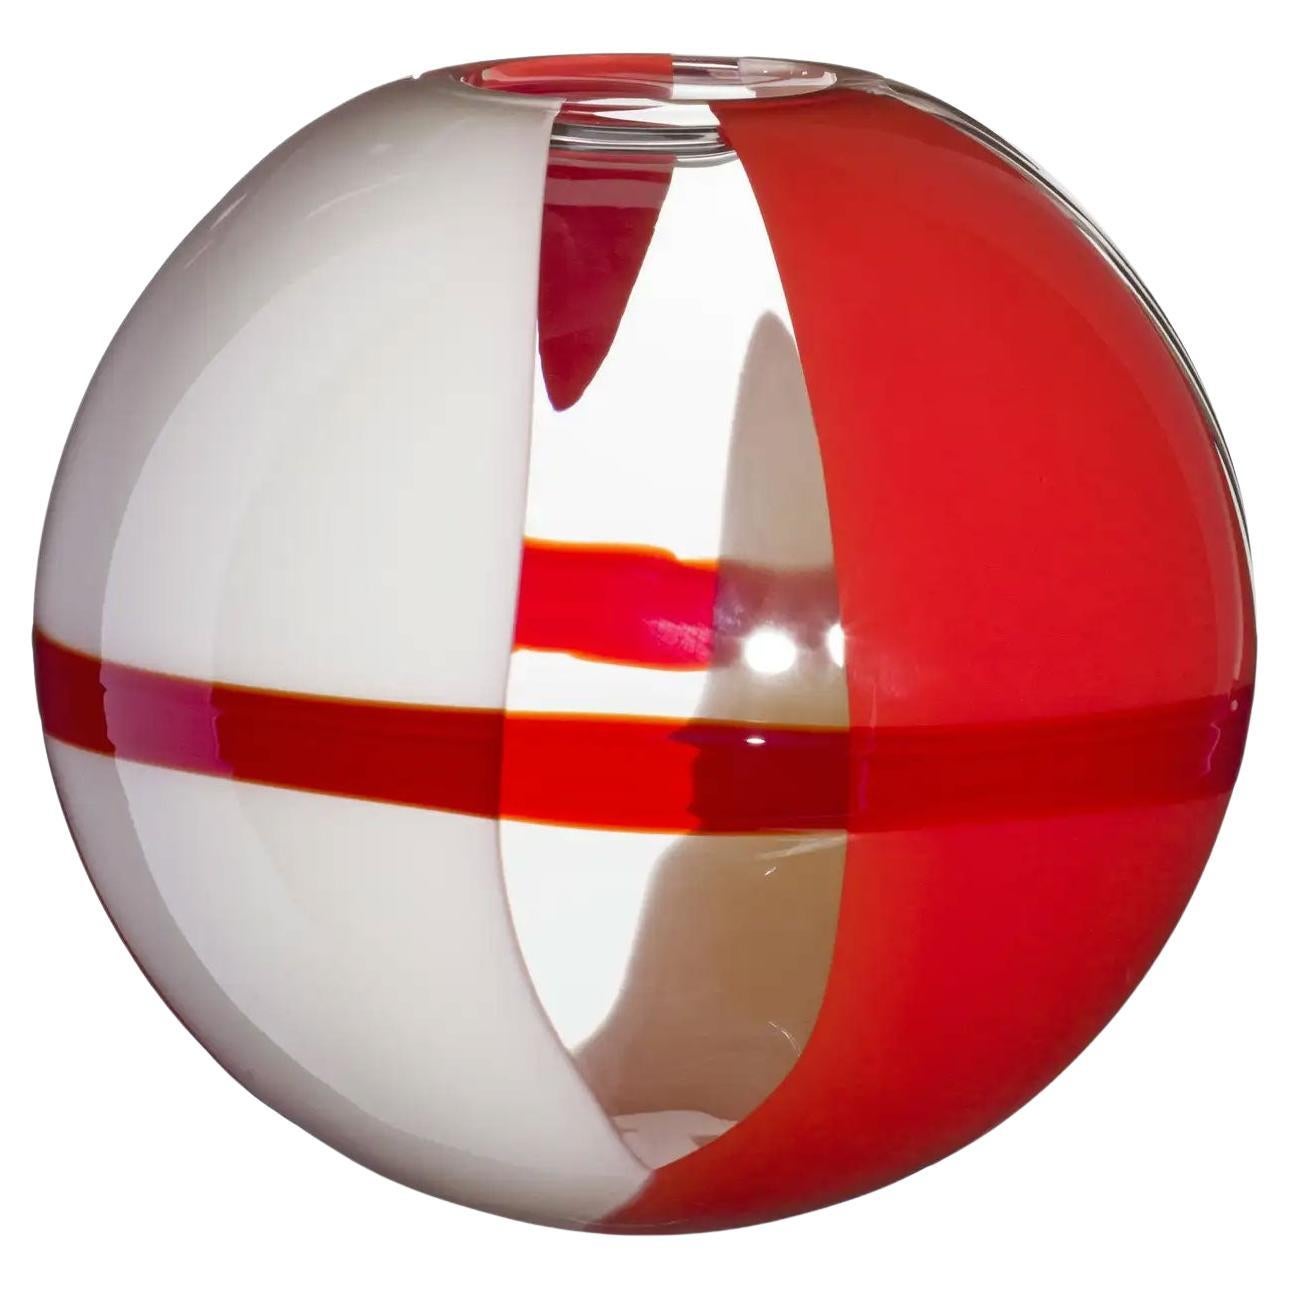 Large Sfera Vase in Orange, Red, and Ivory by Carlo Moretti For Sale